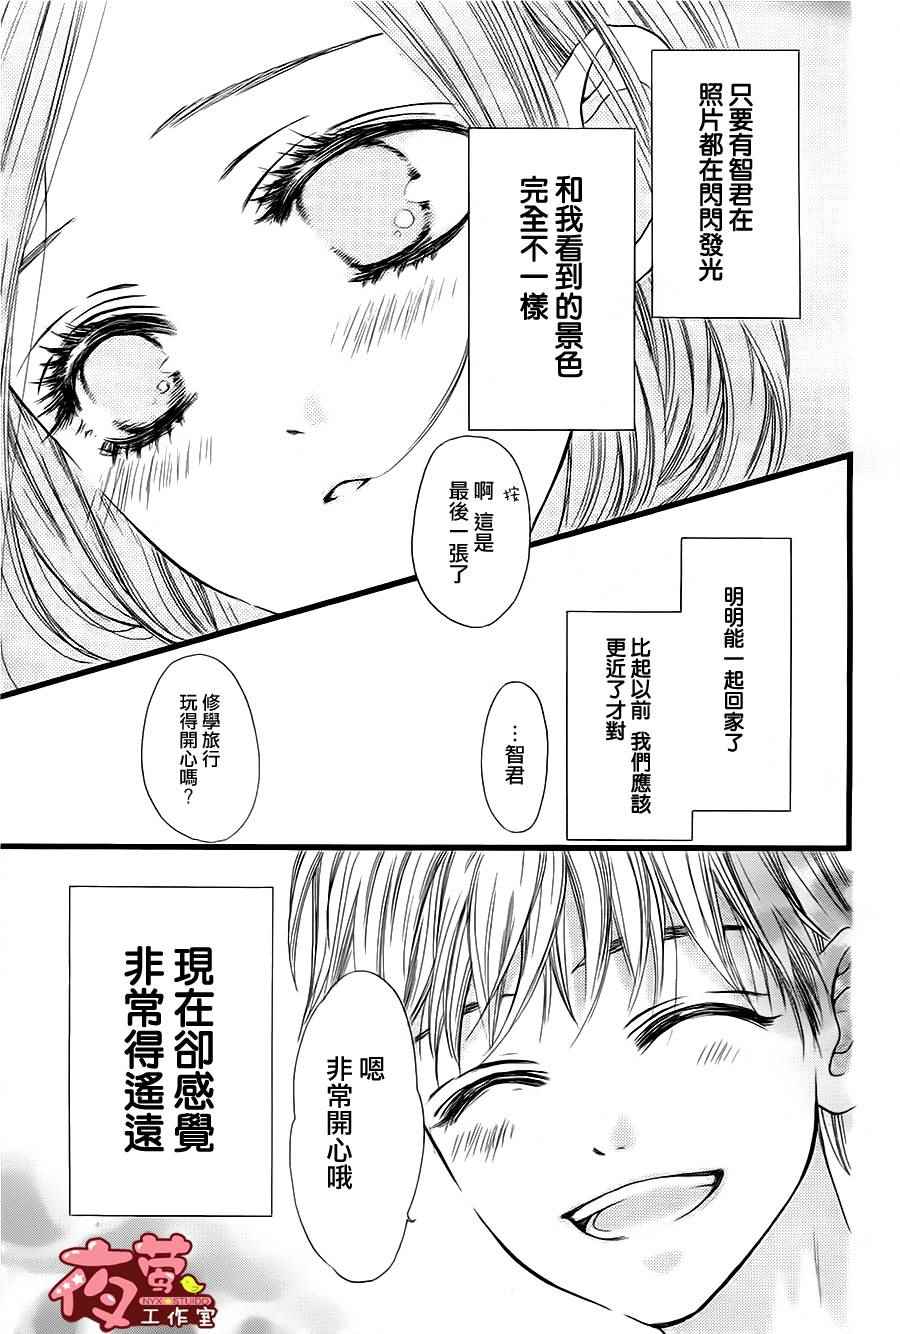 I love you baby - 第23話 - 3